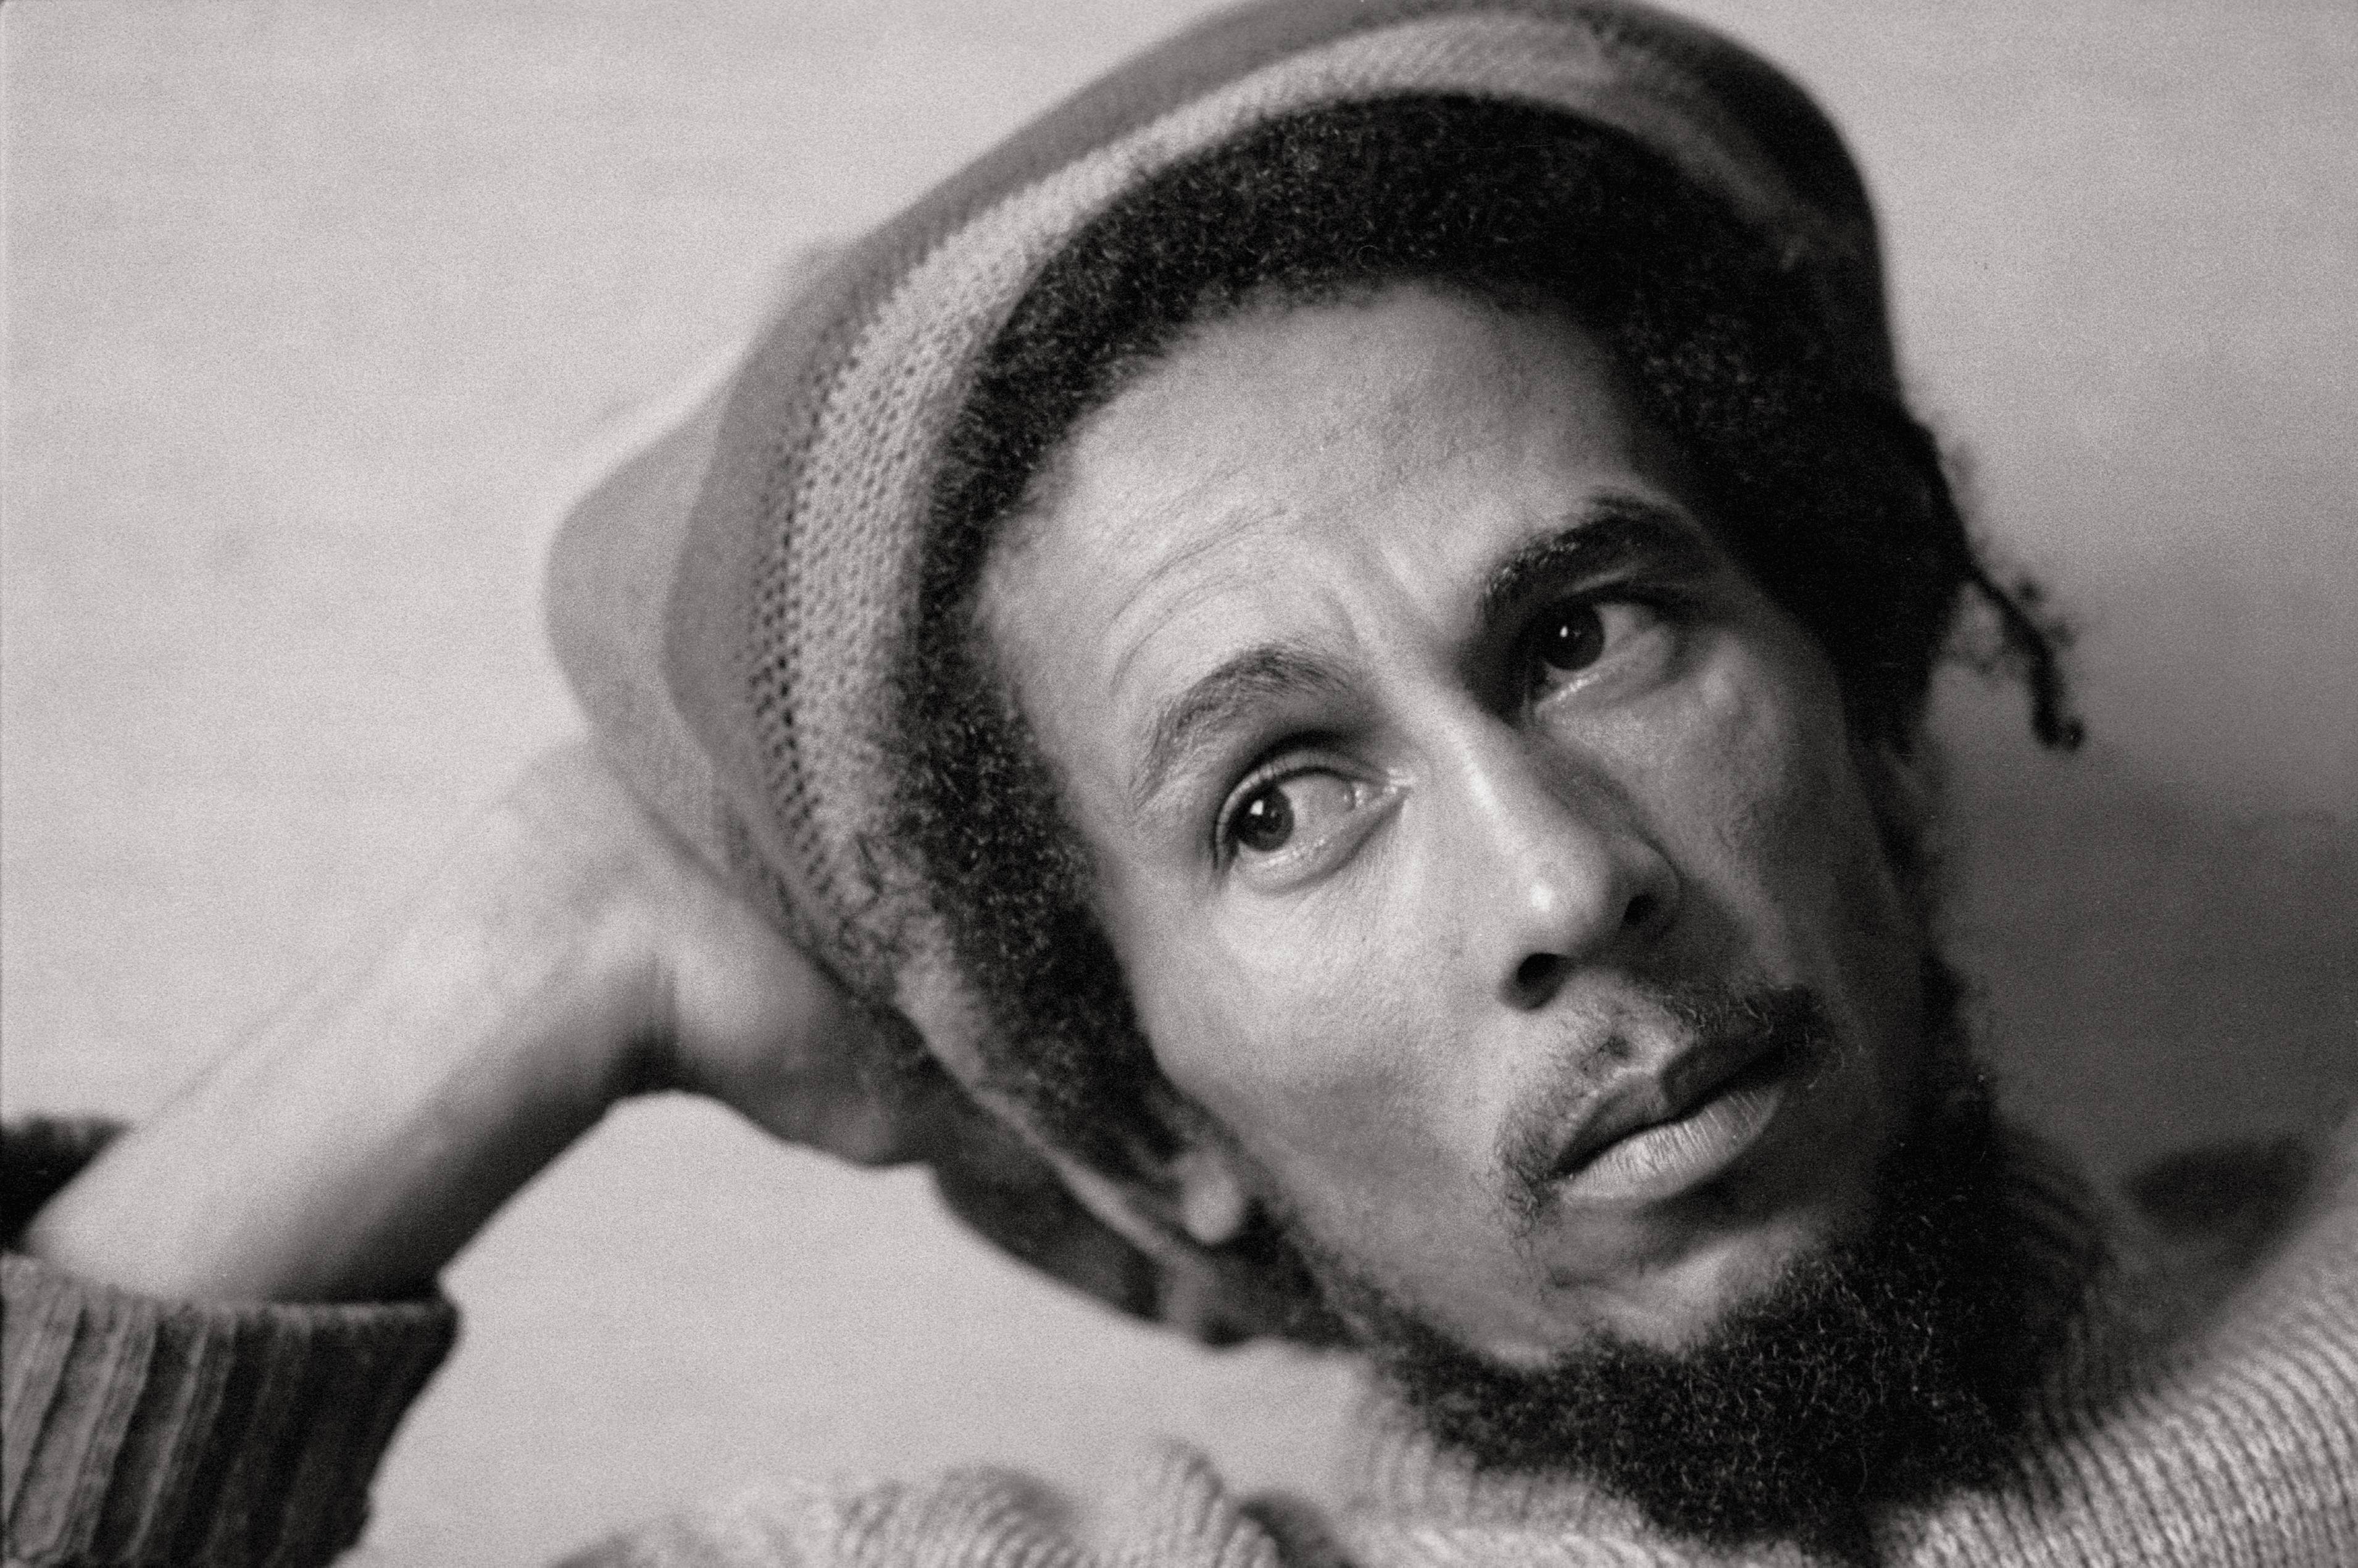 Bob Marley poses with a Jamaican cap for a photo taken on January 01, 1980. | Source: Getty Images